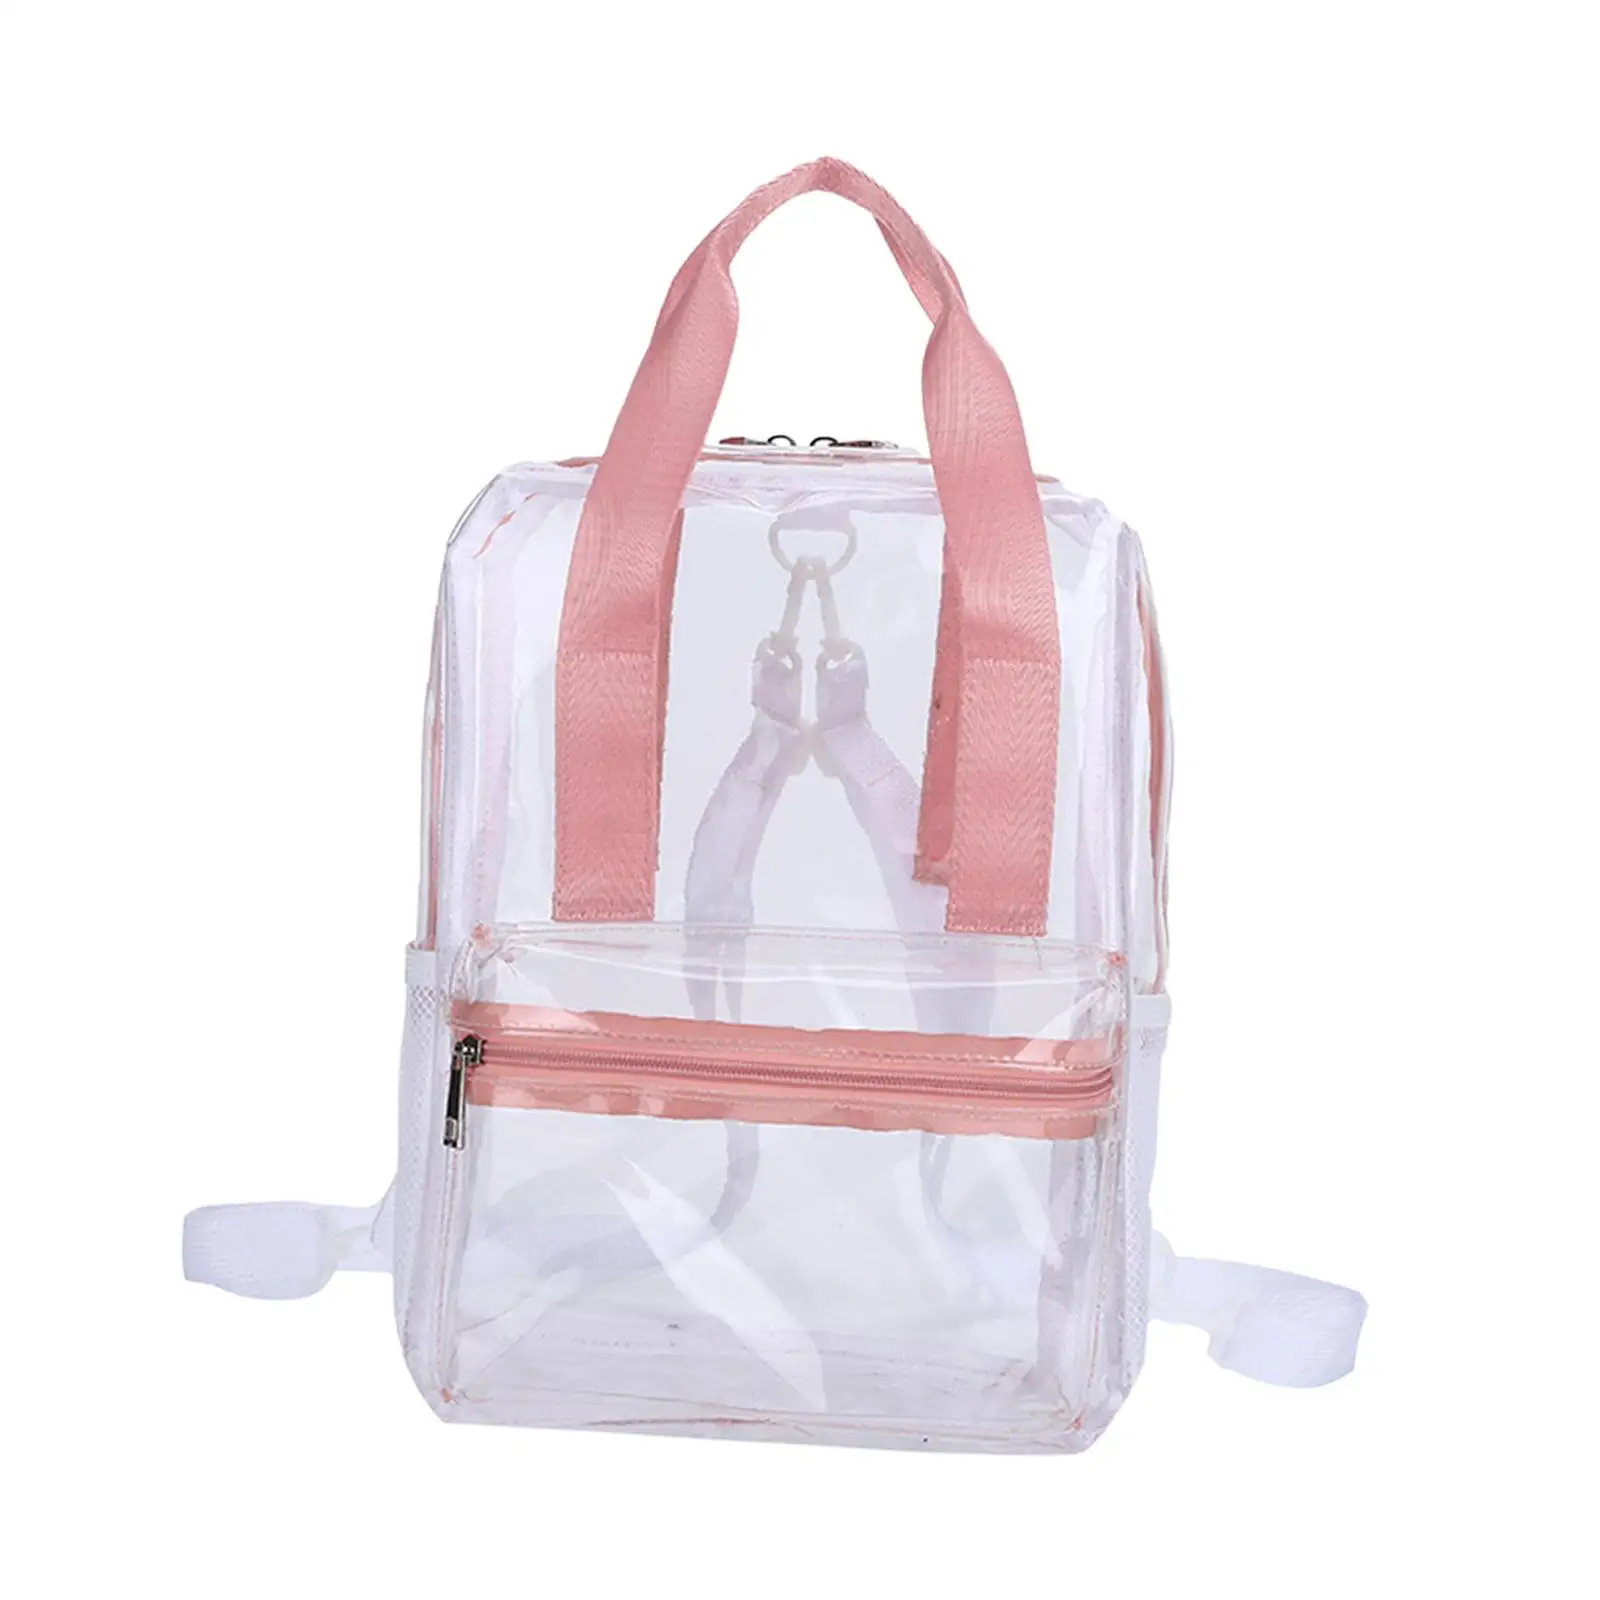 PVC Backpack Girls Boys Large Rucksack with Front Pocket Transparent Bag School for Hiking Outdoor Concert Swimming Sports